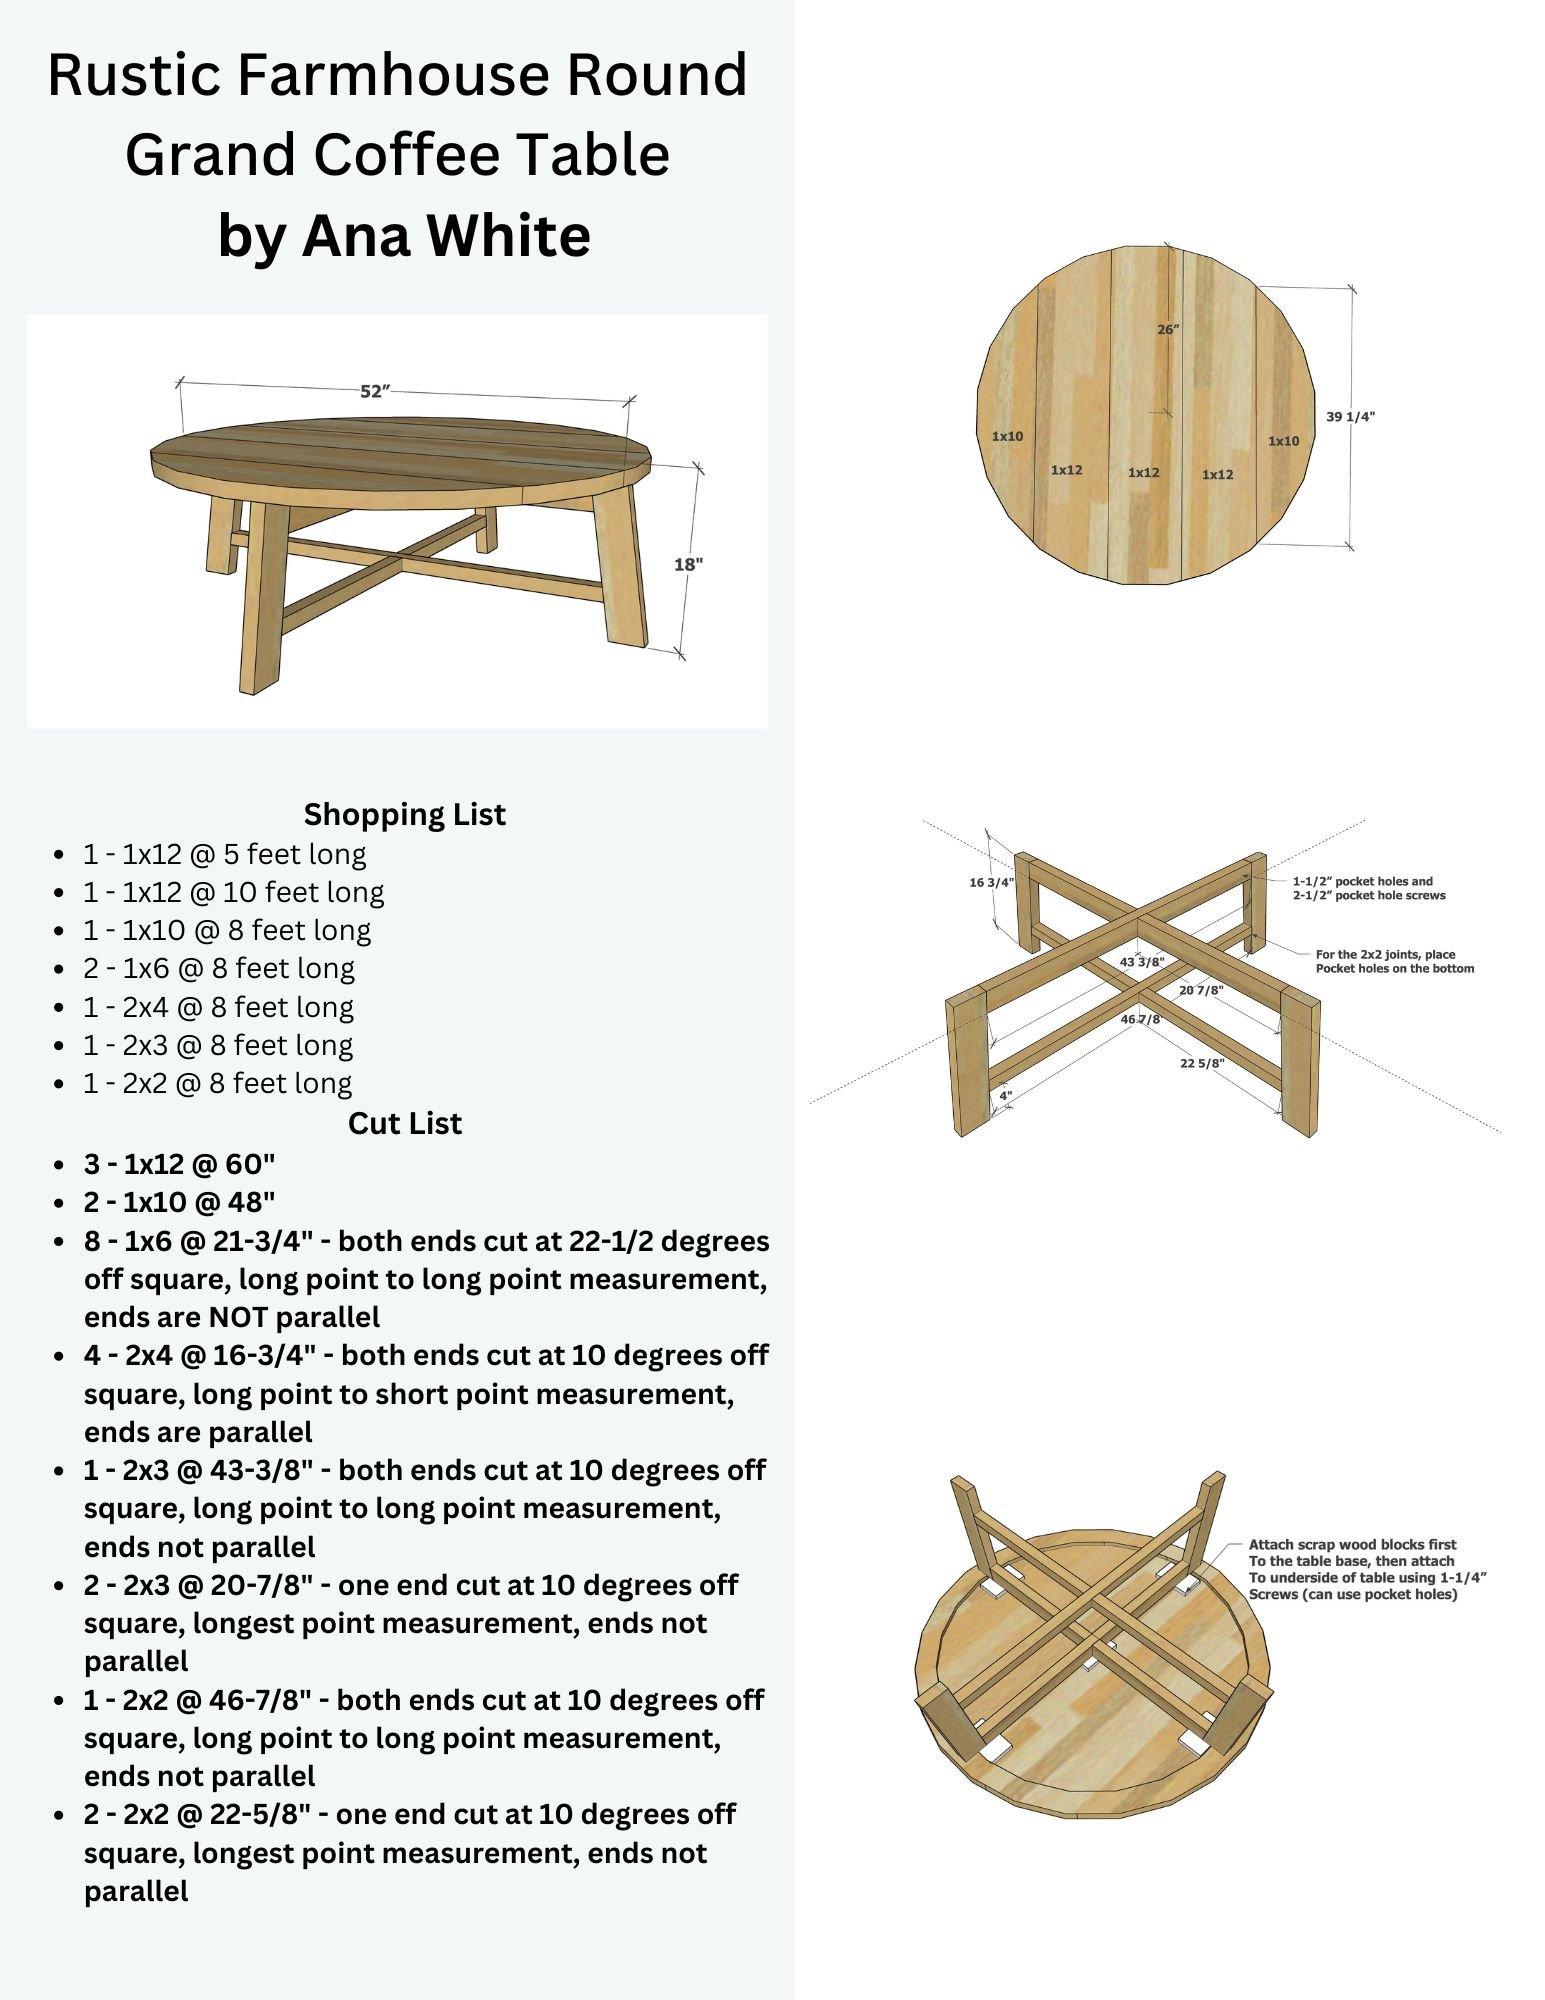 Rustic Farmhouse Round Grand Coffee Table Plans